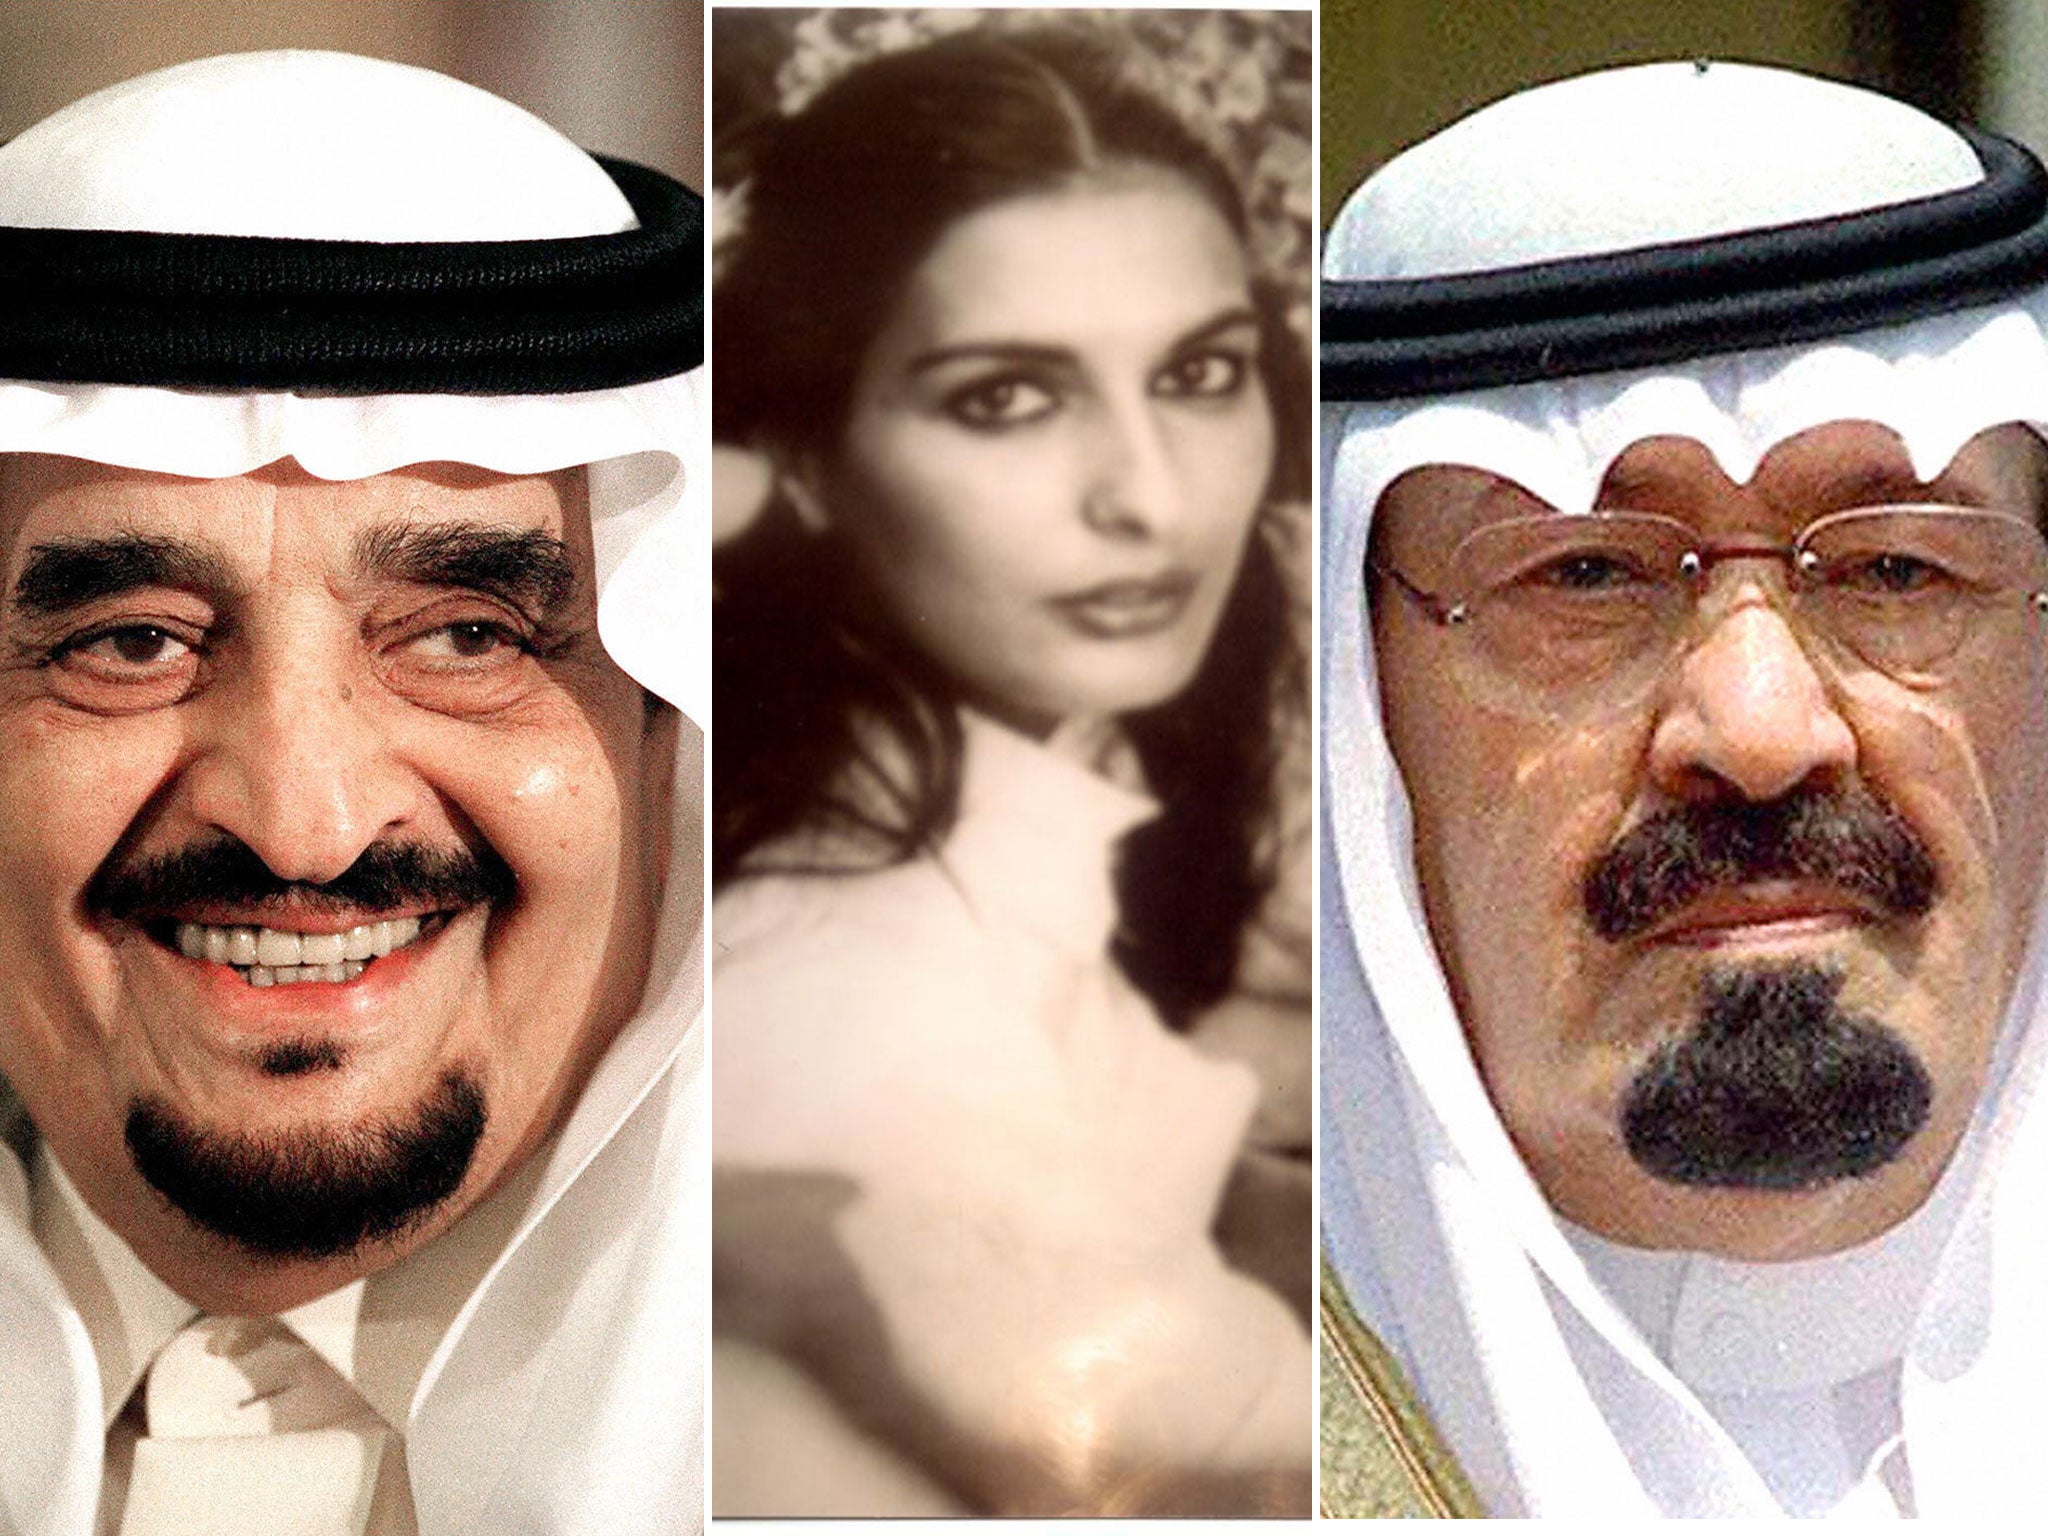 The late King of Saudi Arabia, his secret Christian wife and the missing £12 million Janan Harb threatens to spill the beans if promised money isnt paid The Independent The Independent